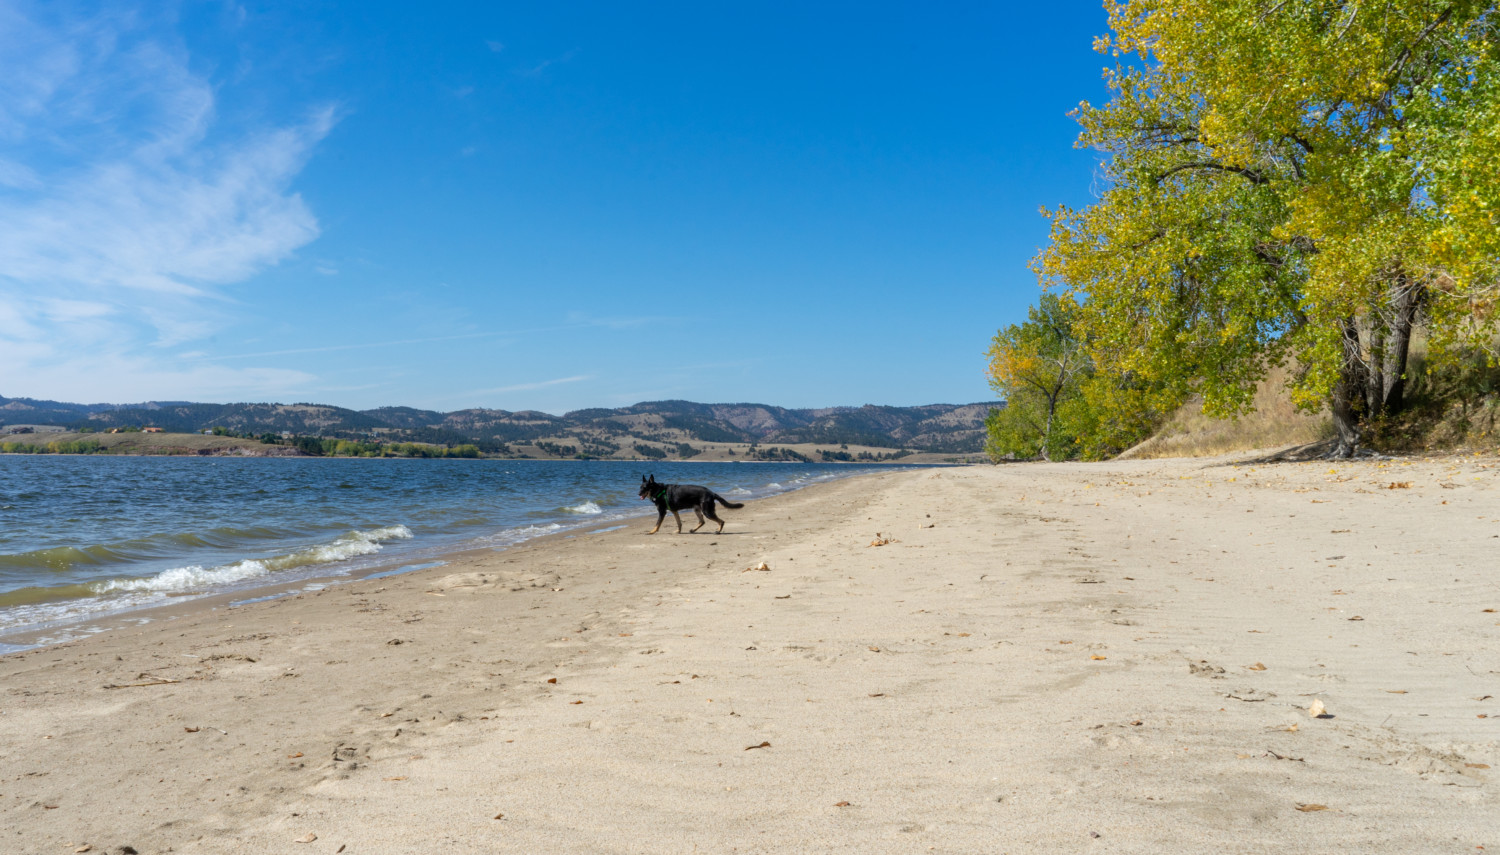 Ty the Shar-pei and Buster the German Shepherd from GoPetFriendly.com on the pet-friendly beach at Angostura Recreation Area, SD